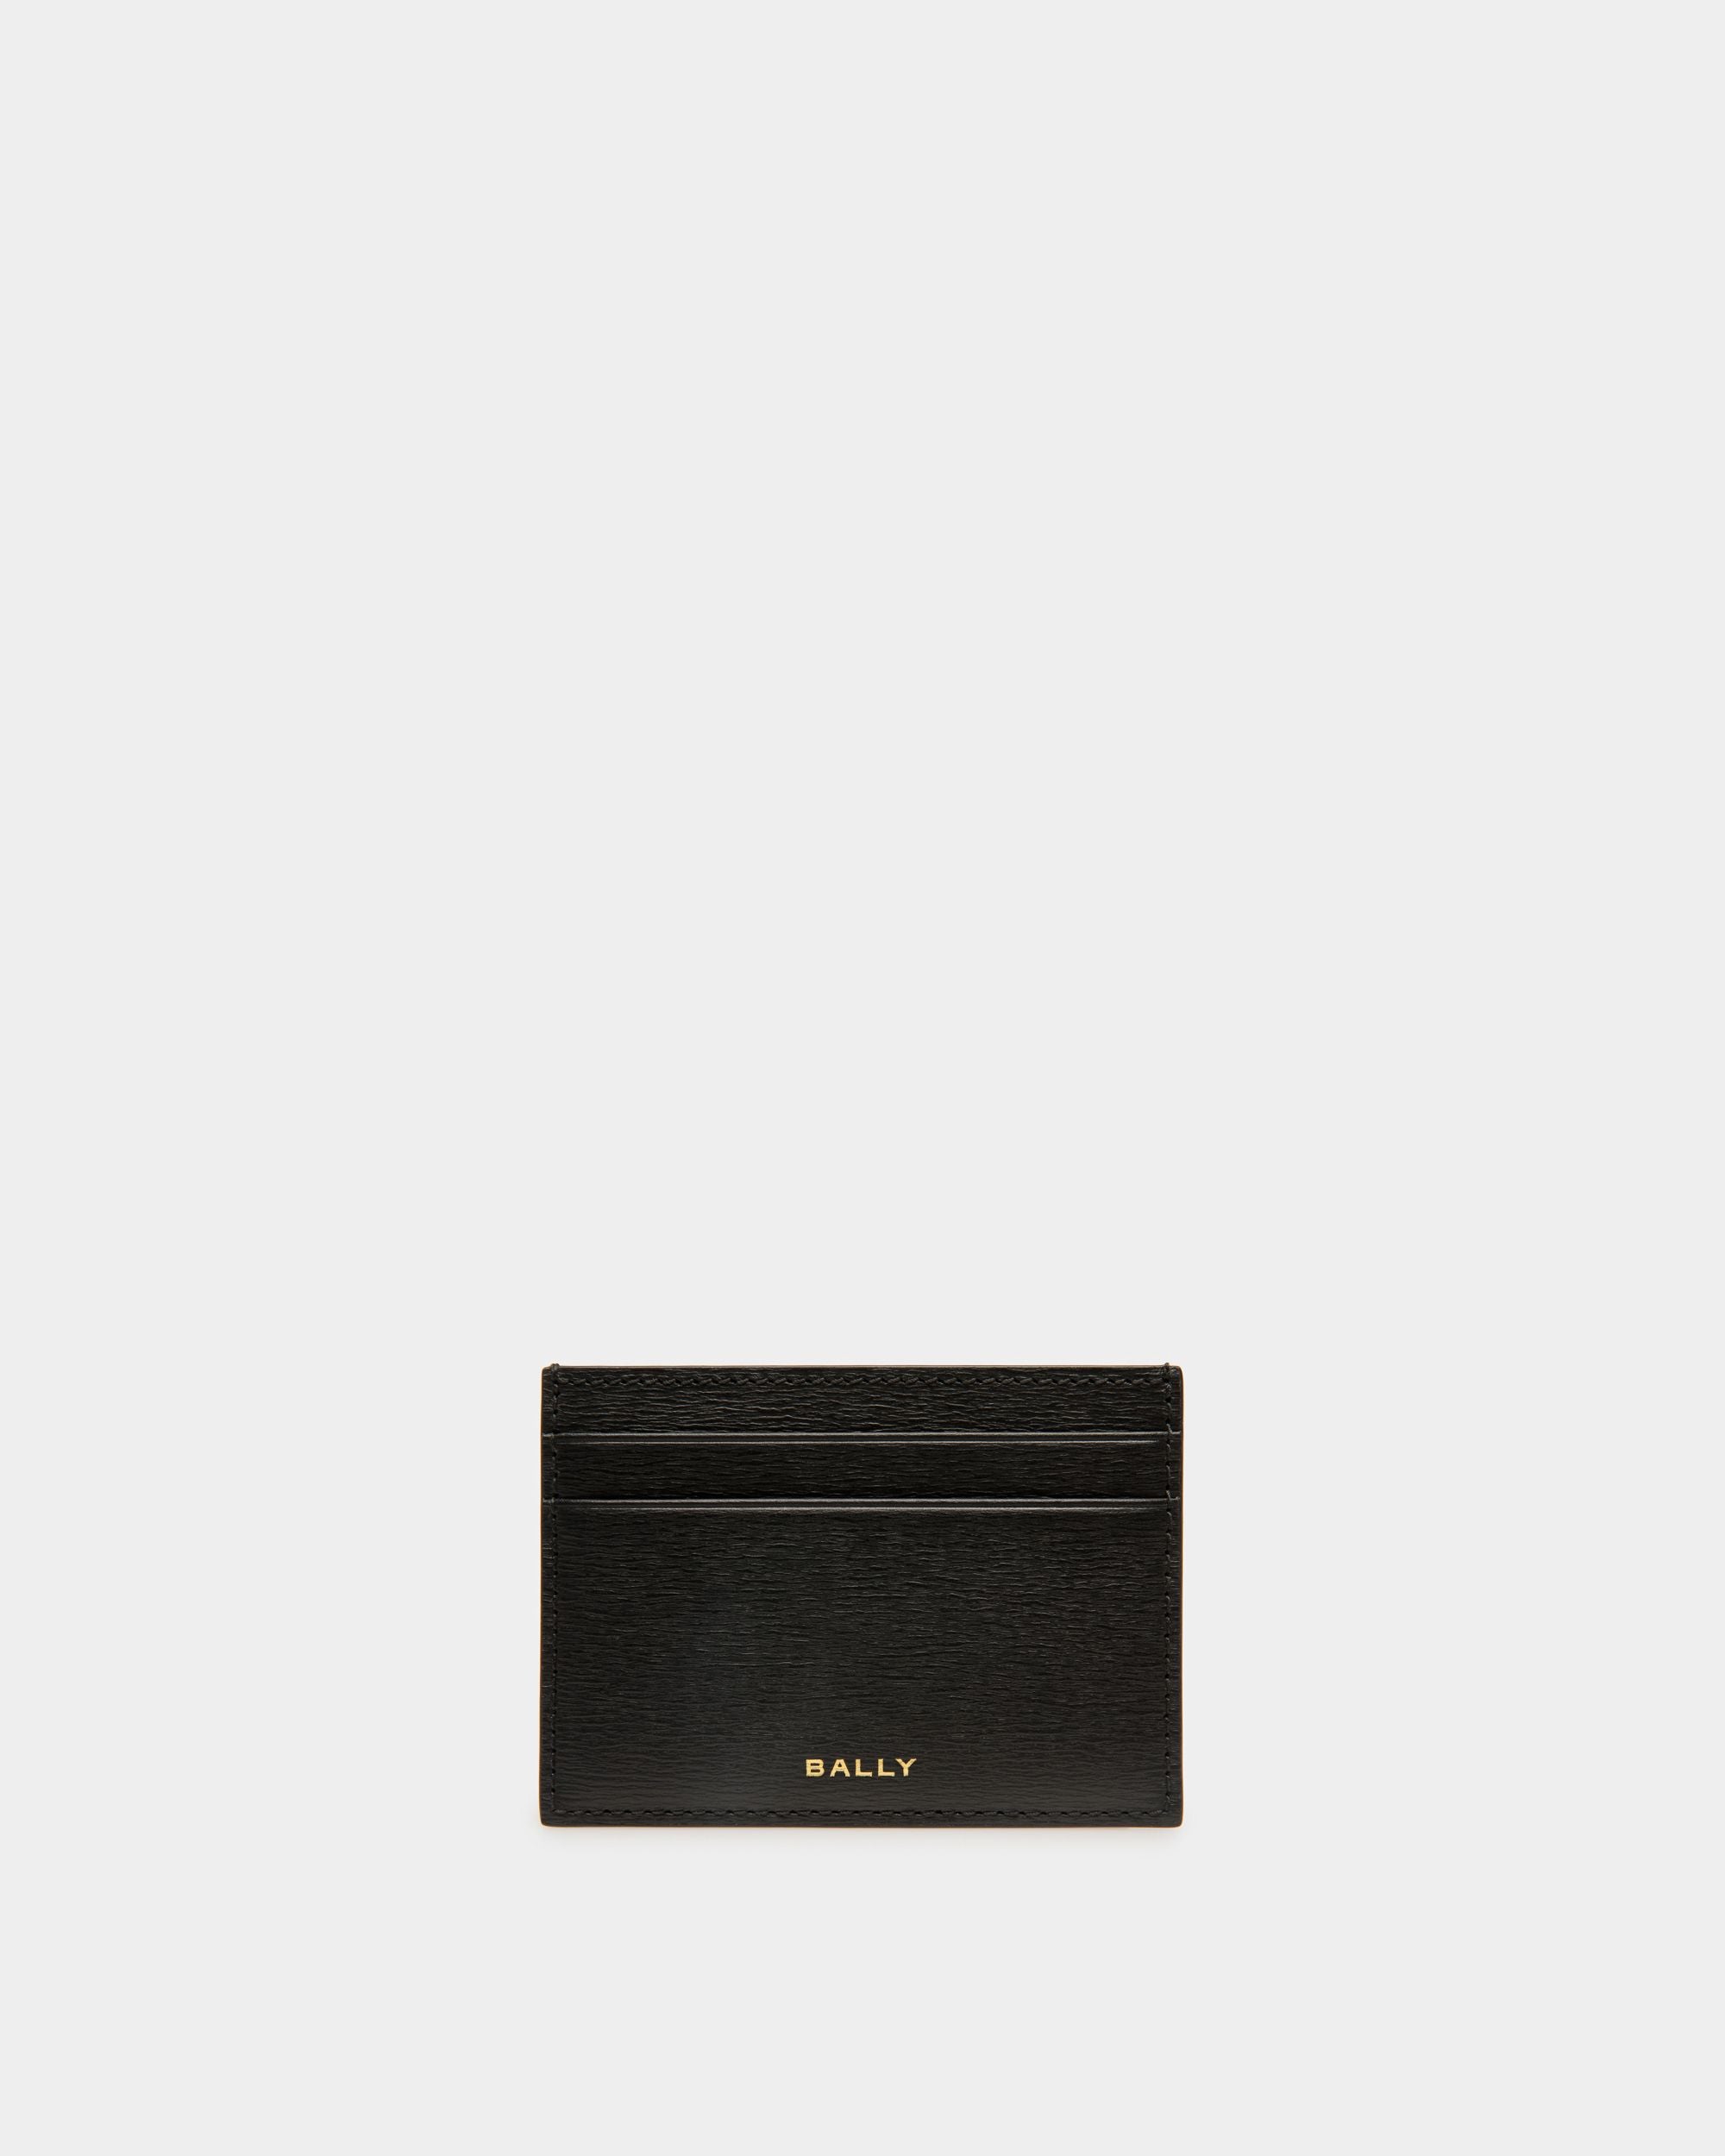 Cny | Men's Card Holder in Black And Red Grained Leather | Bally | Still Life Front